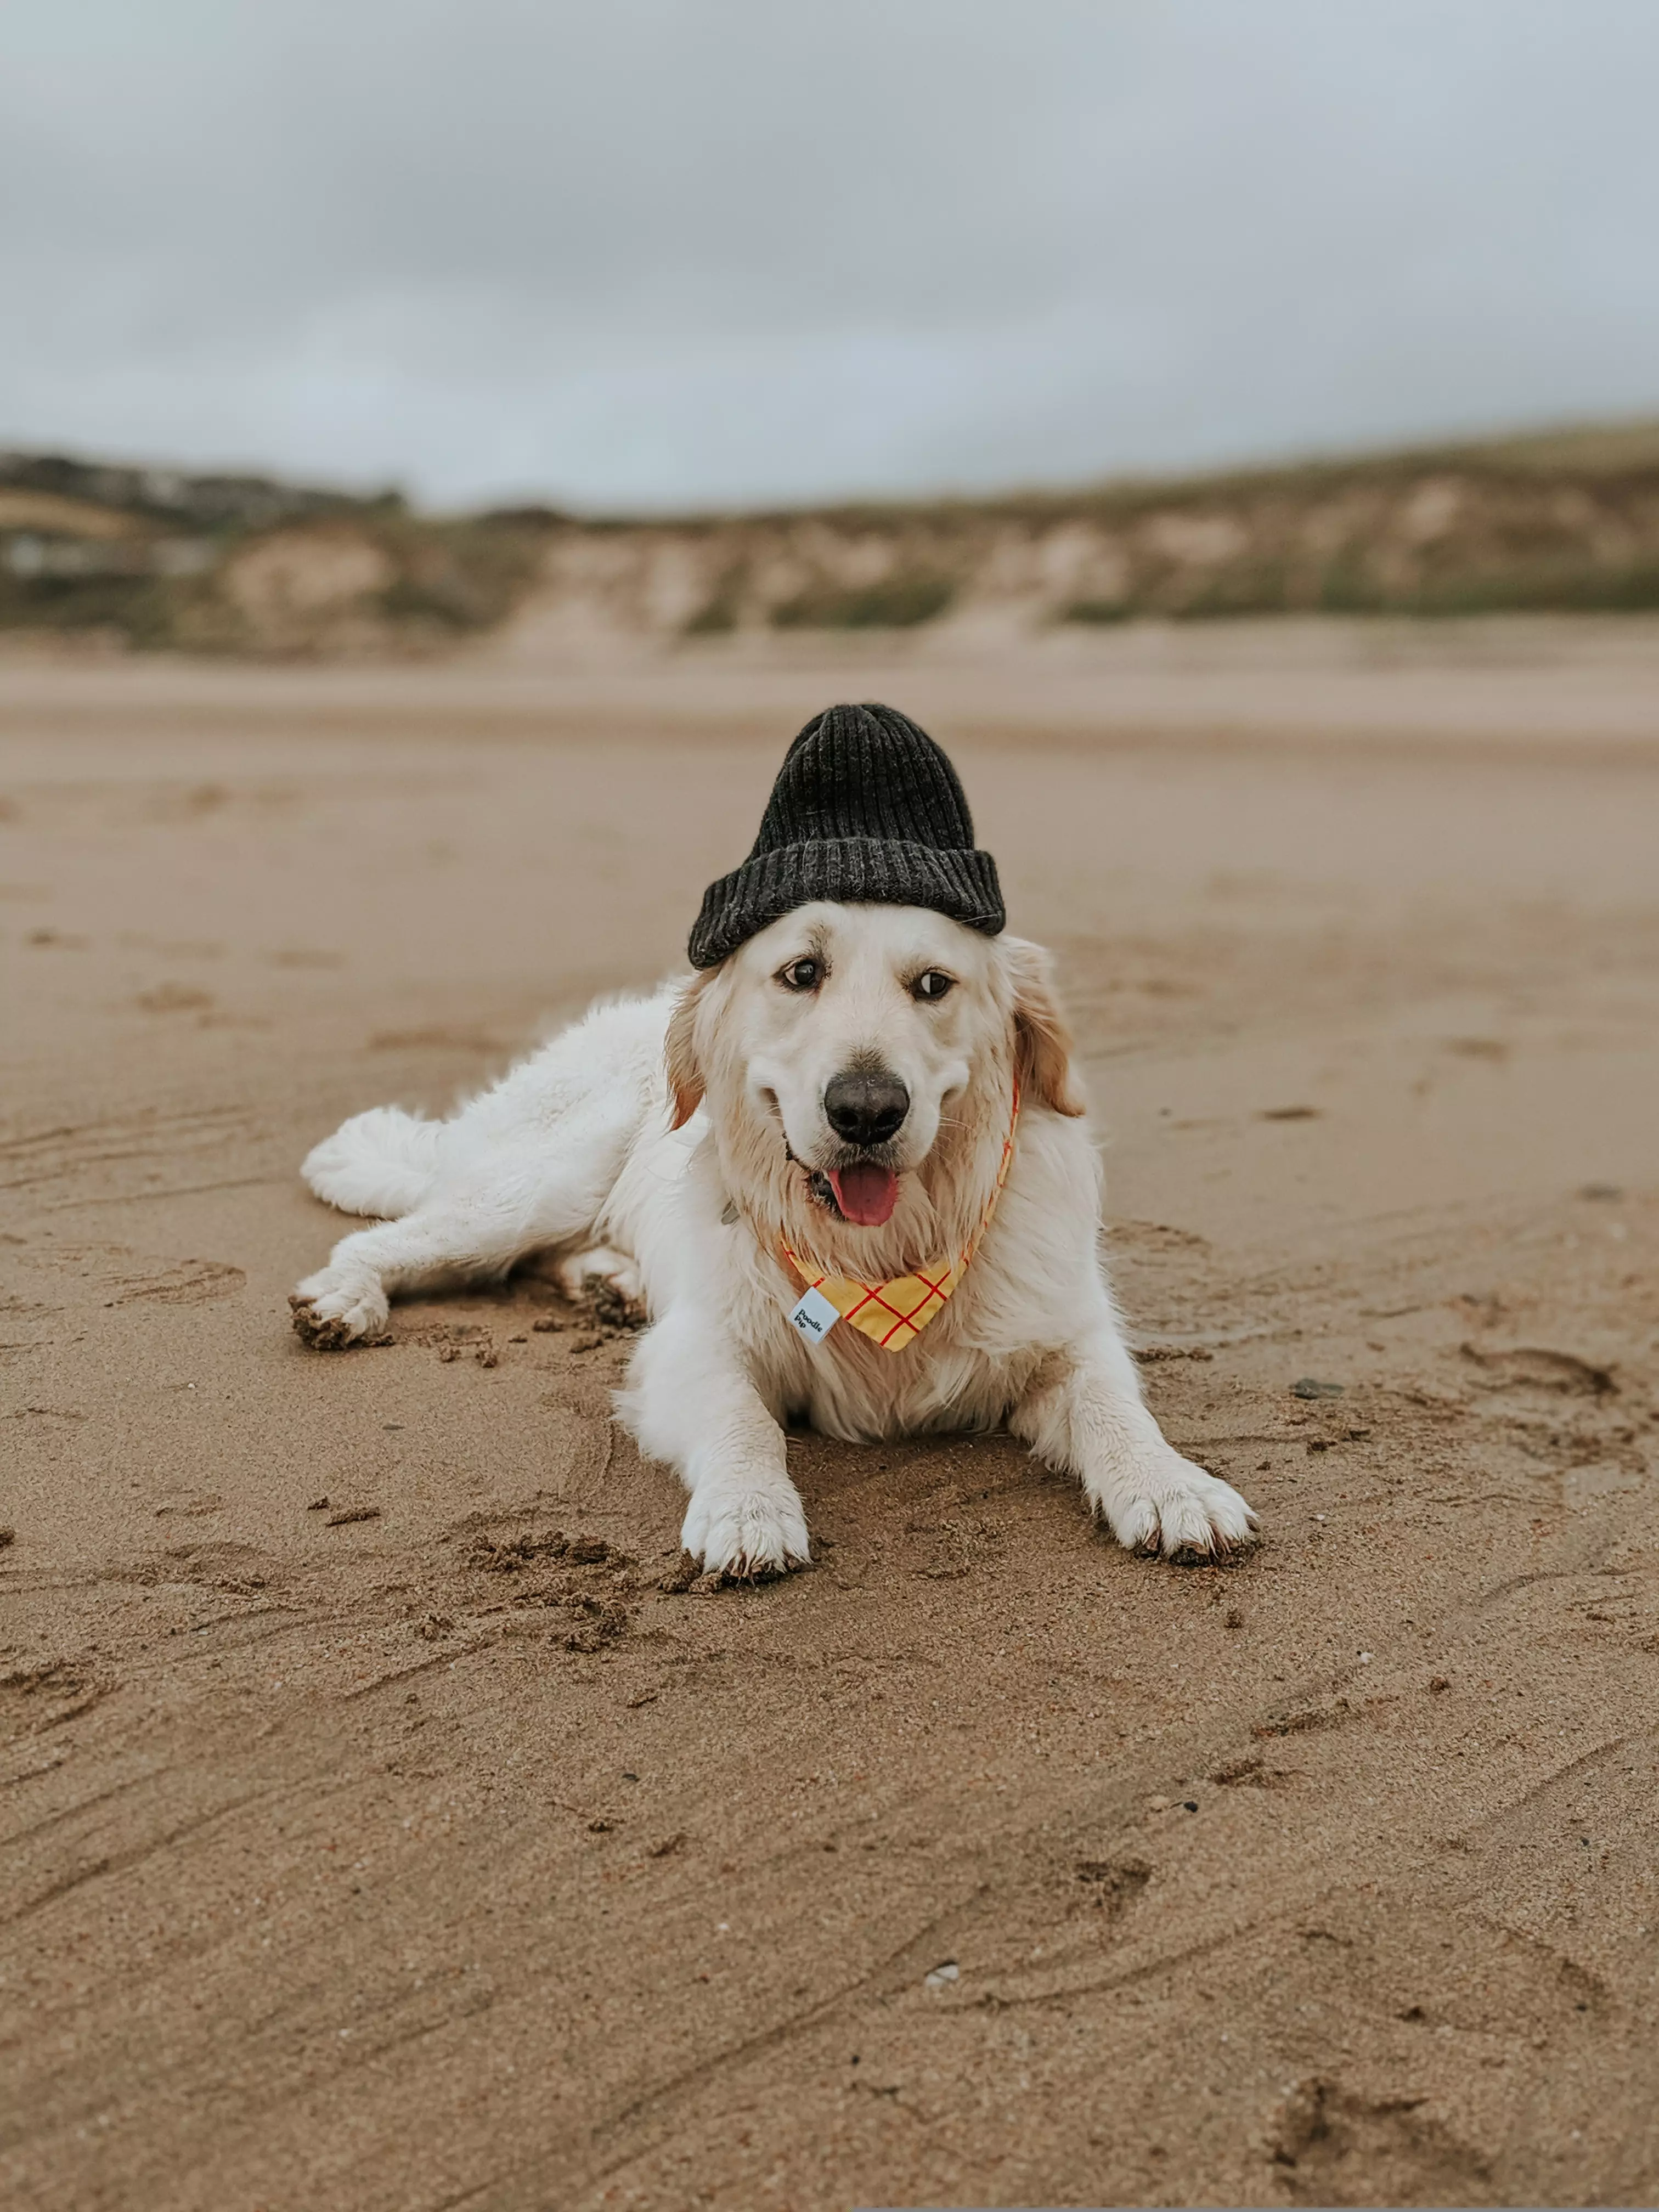 Enjoy long walks on the beach with your furry friend.